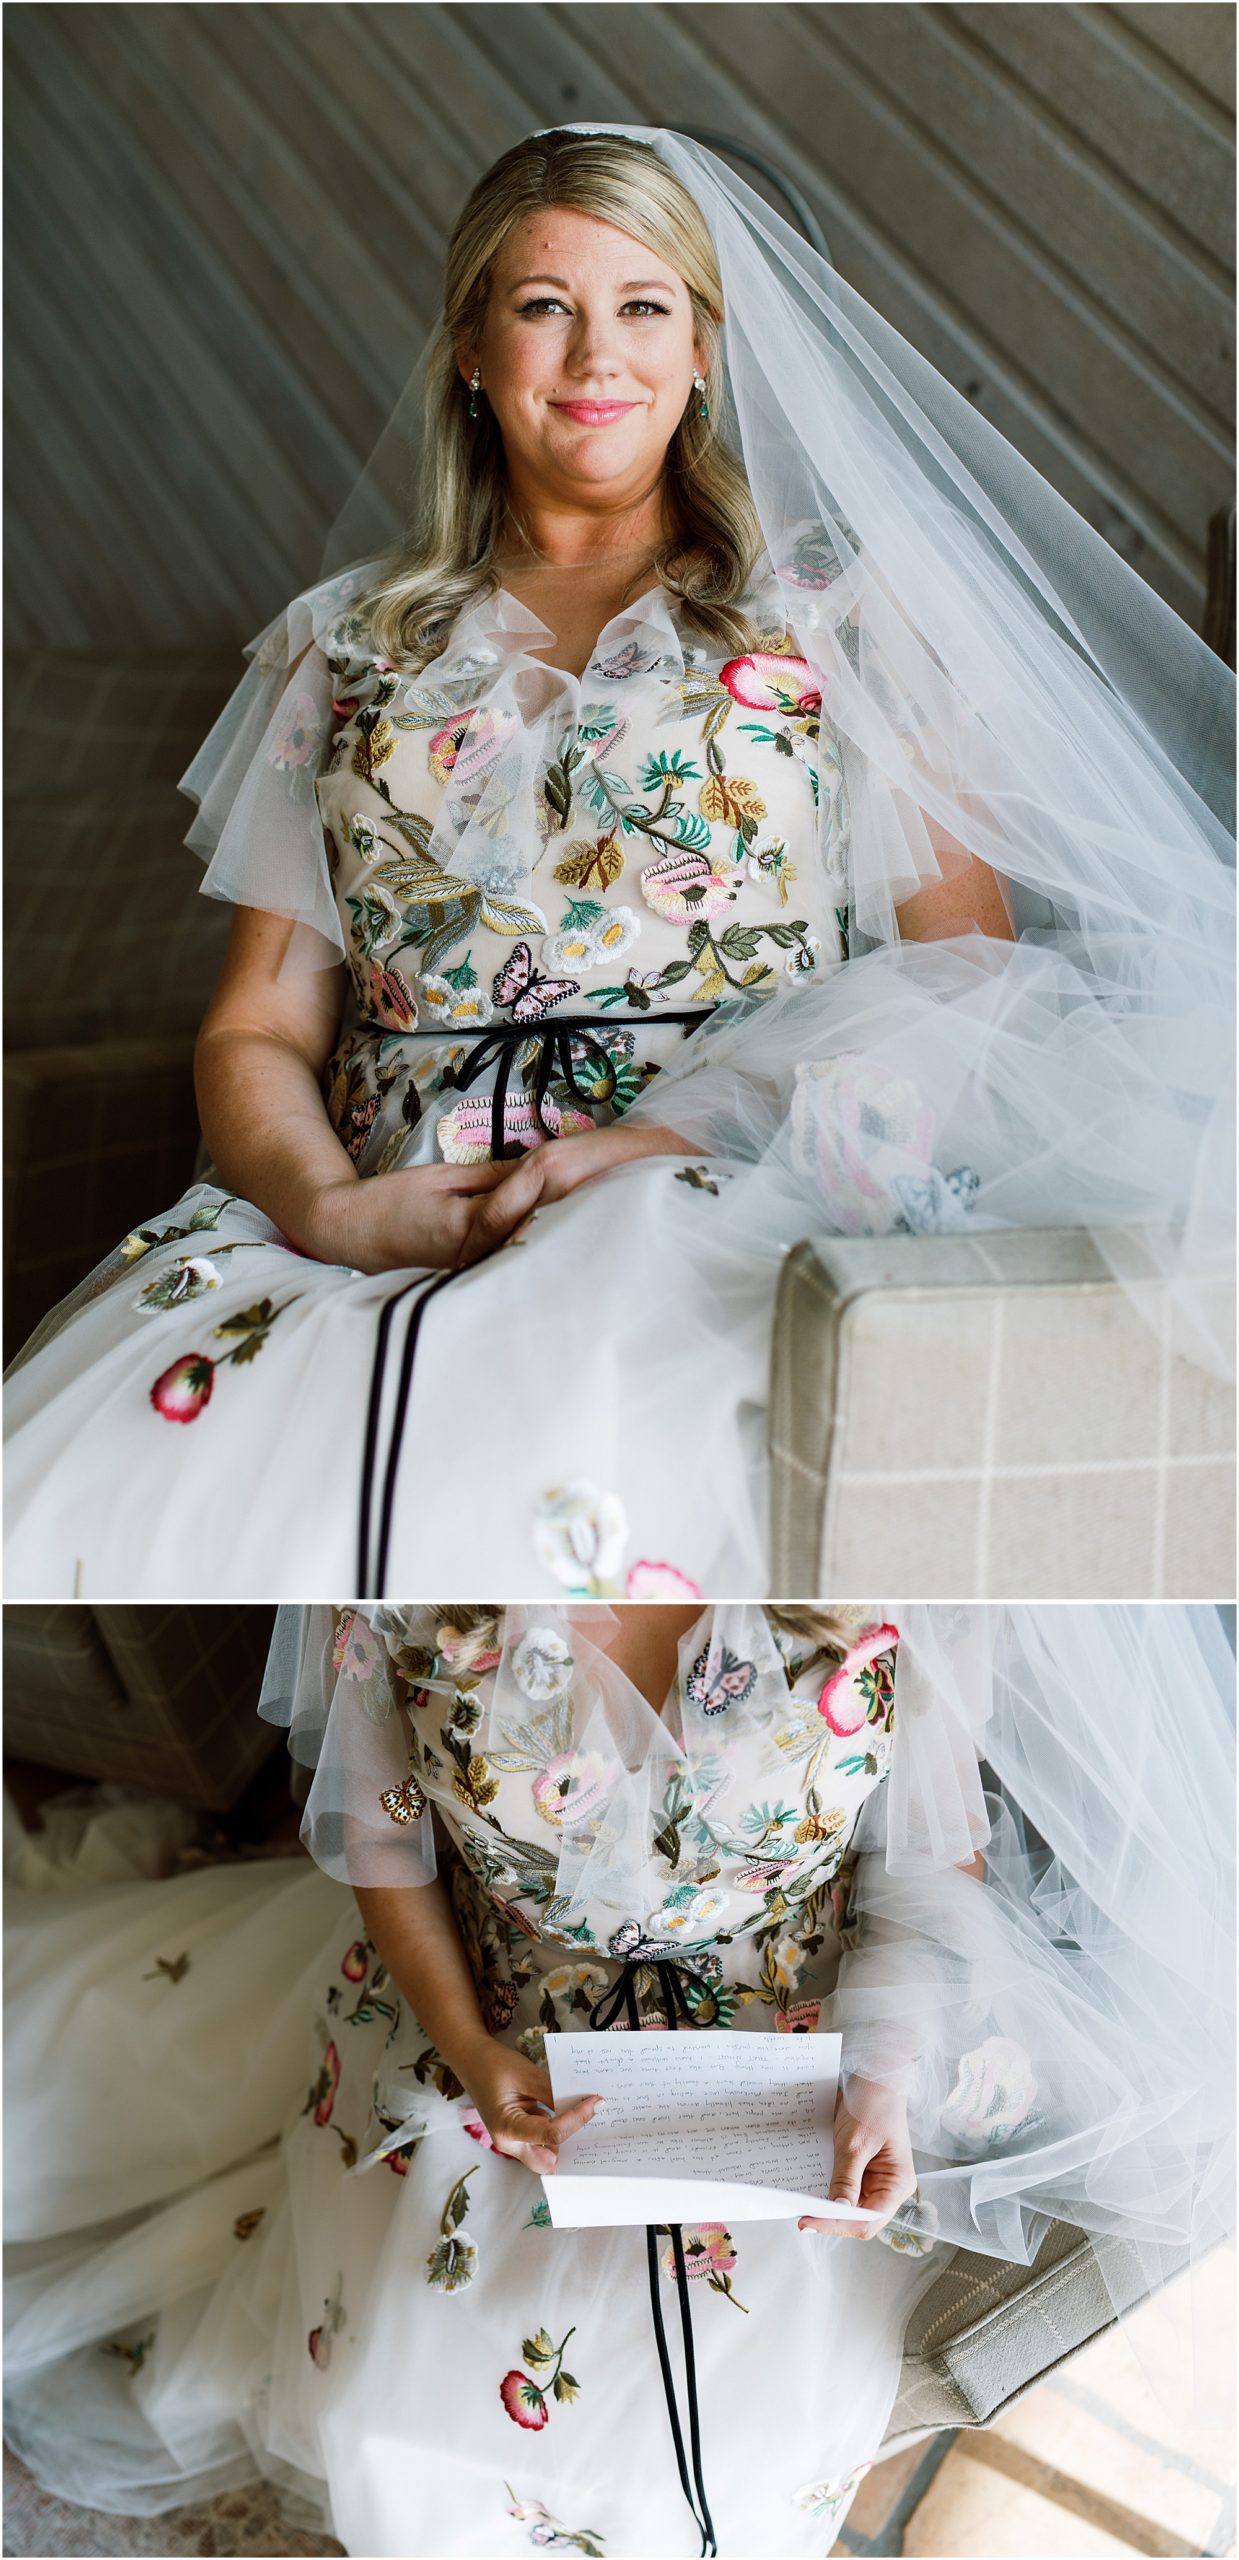 Bride wearing Monique Lhuillier and reading a letter from her groom before the wedding ceremony